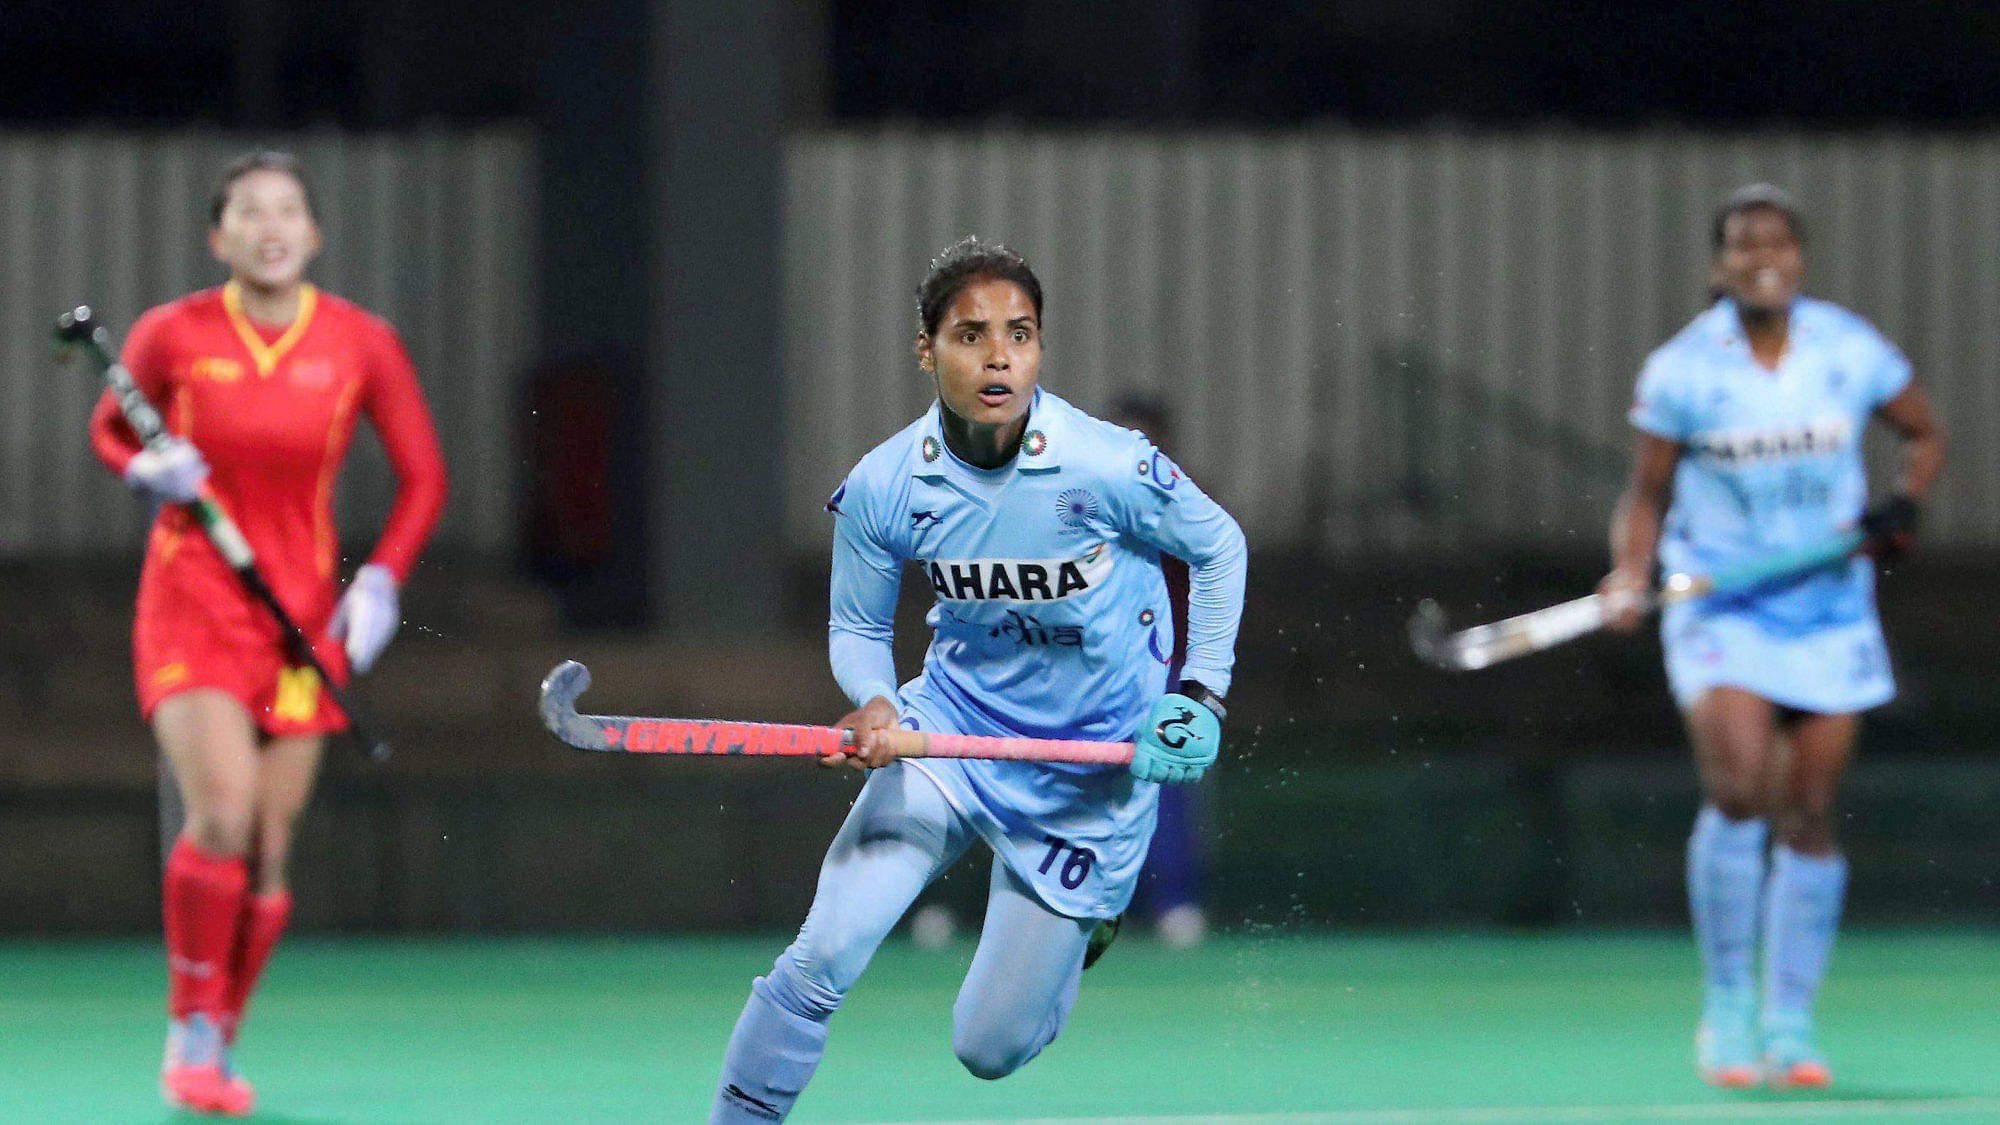 Indian women’s hockey team beat China in the Asia Cup final on Sunday.